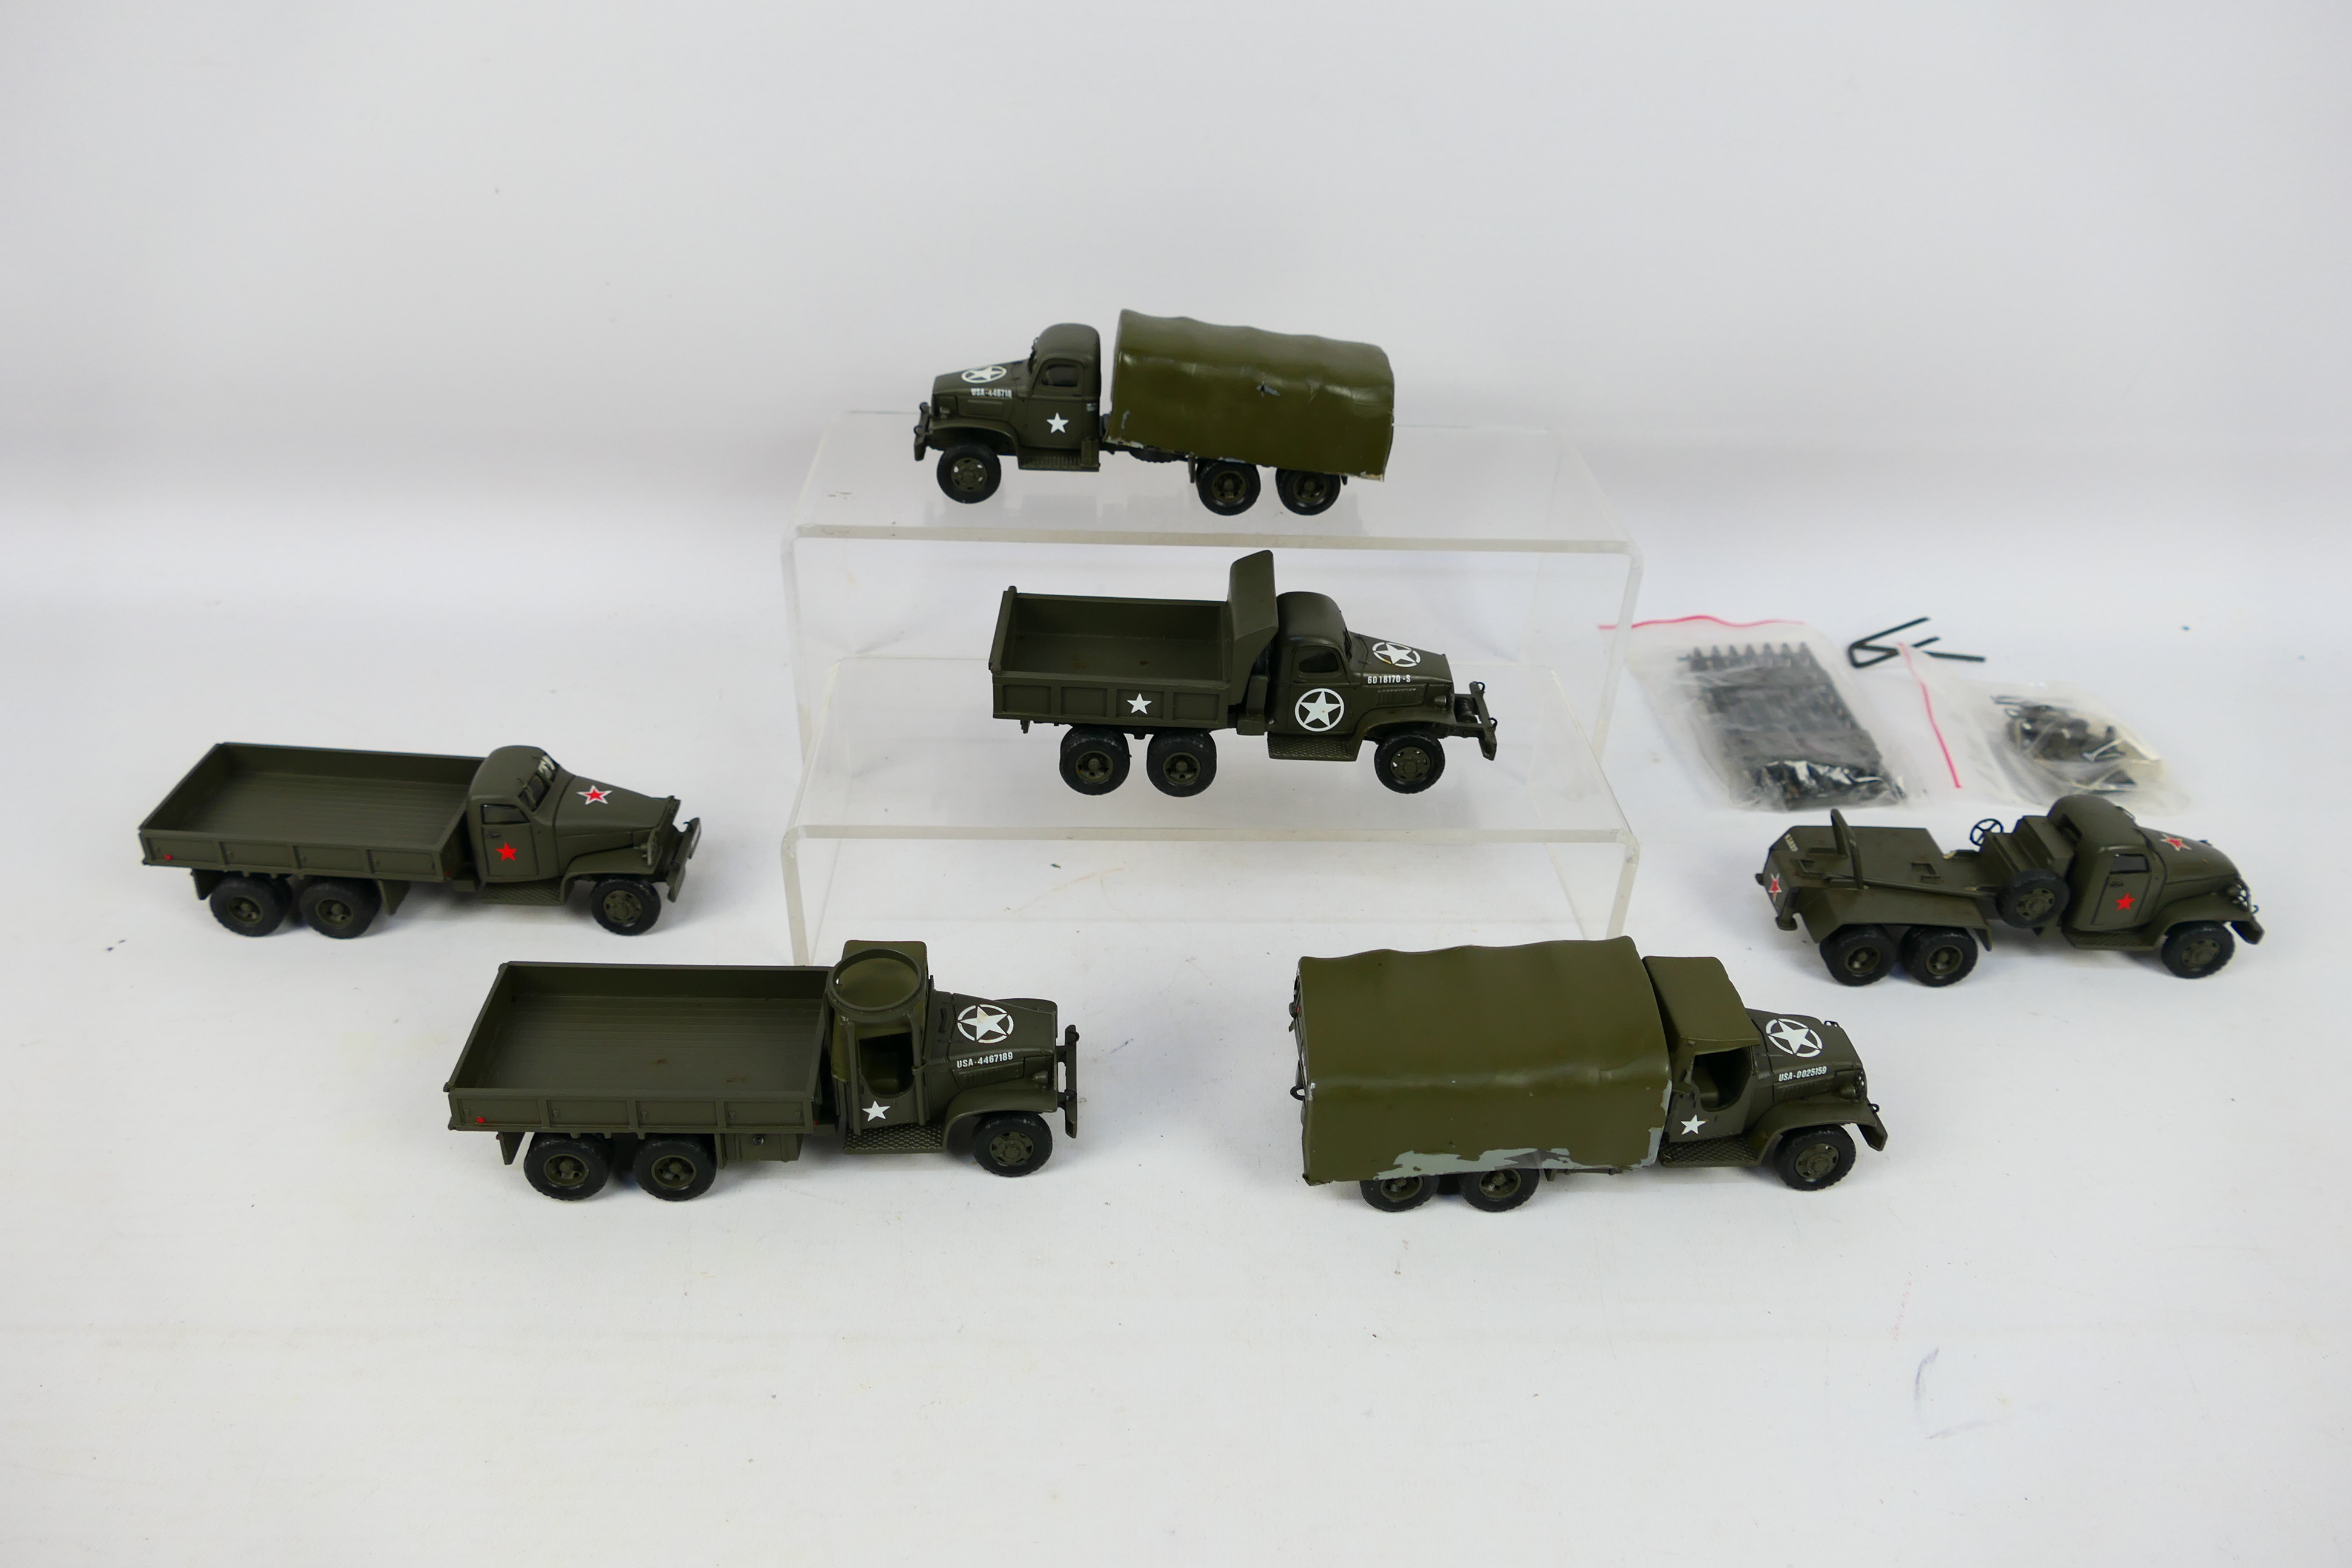 CPC - A collection of military model trucks in resin and metal in 1:48 scale, - Image 11 of 18